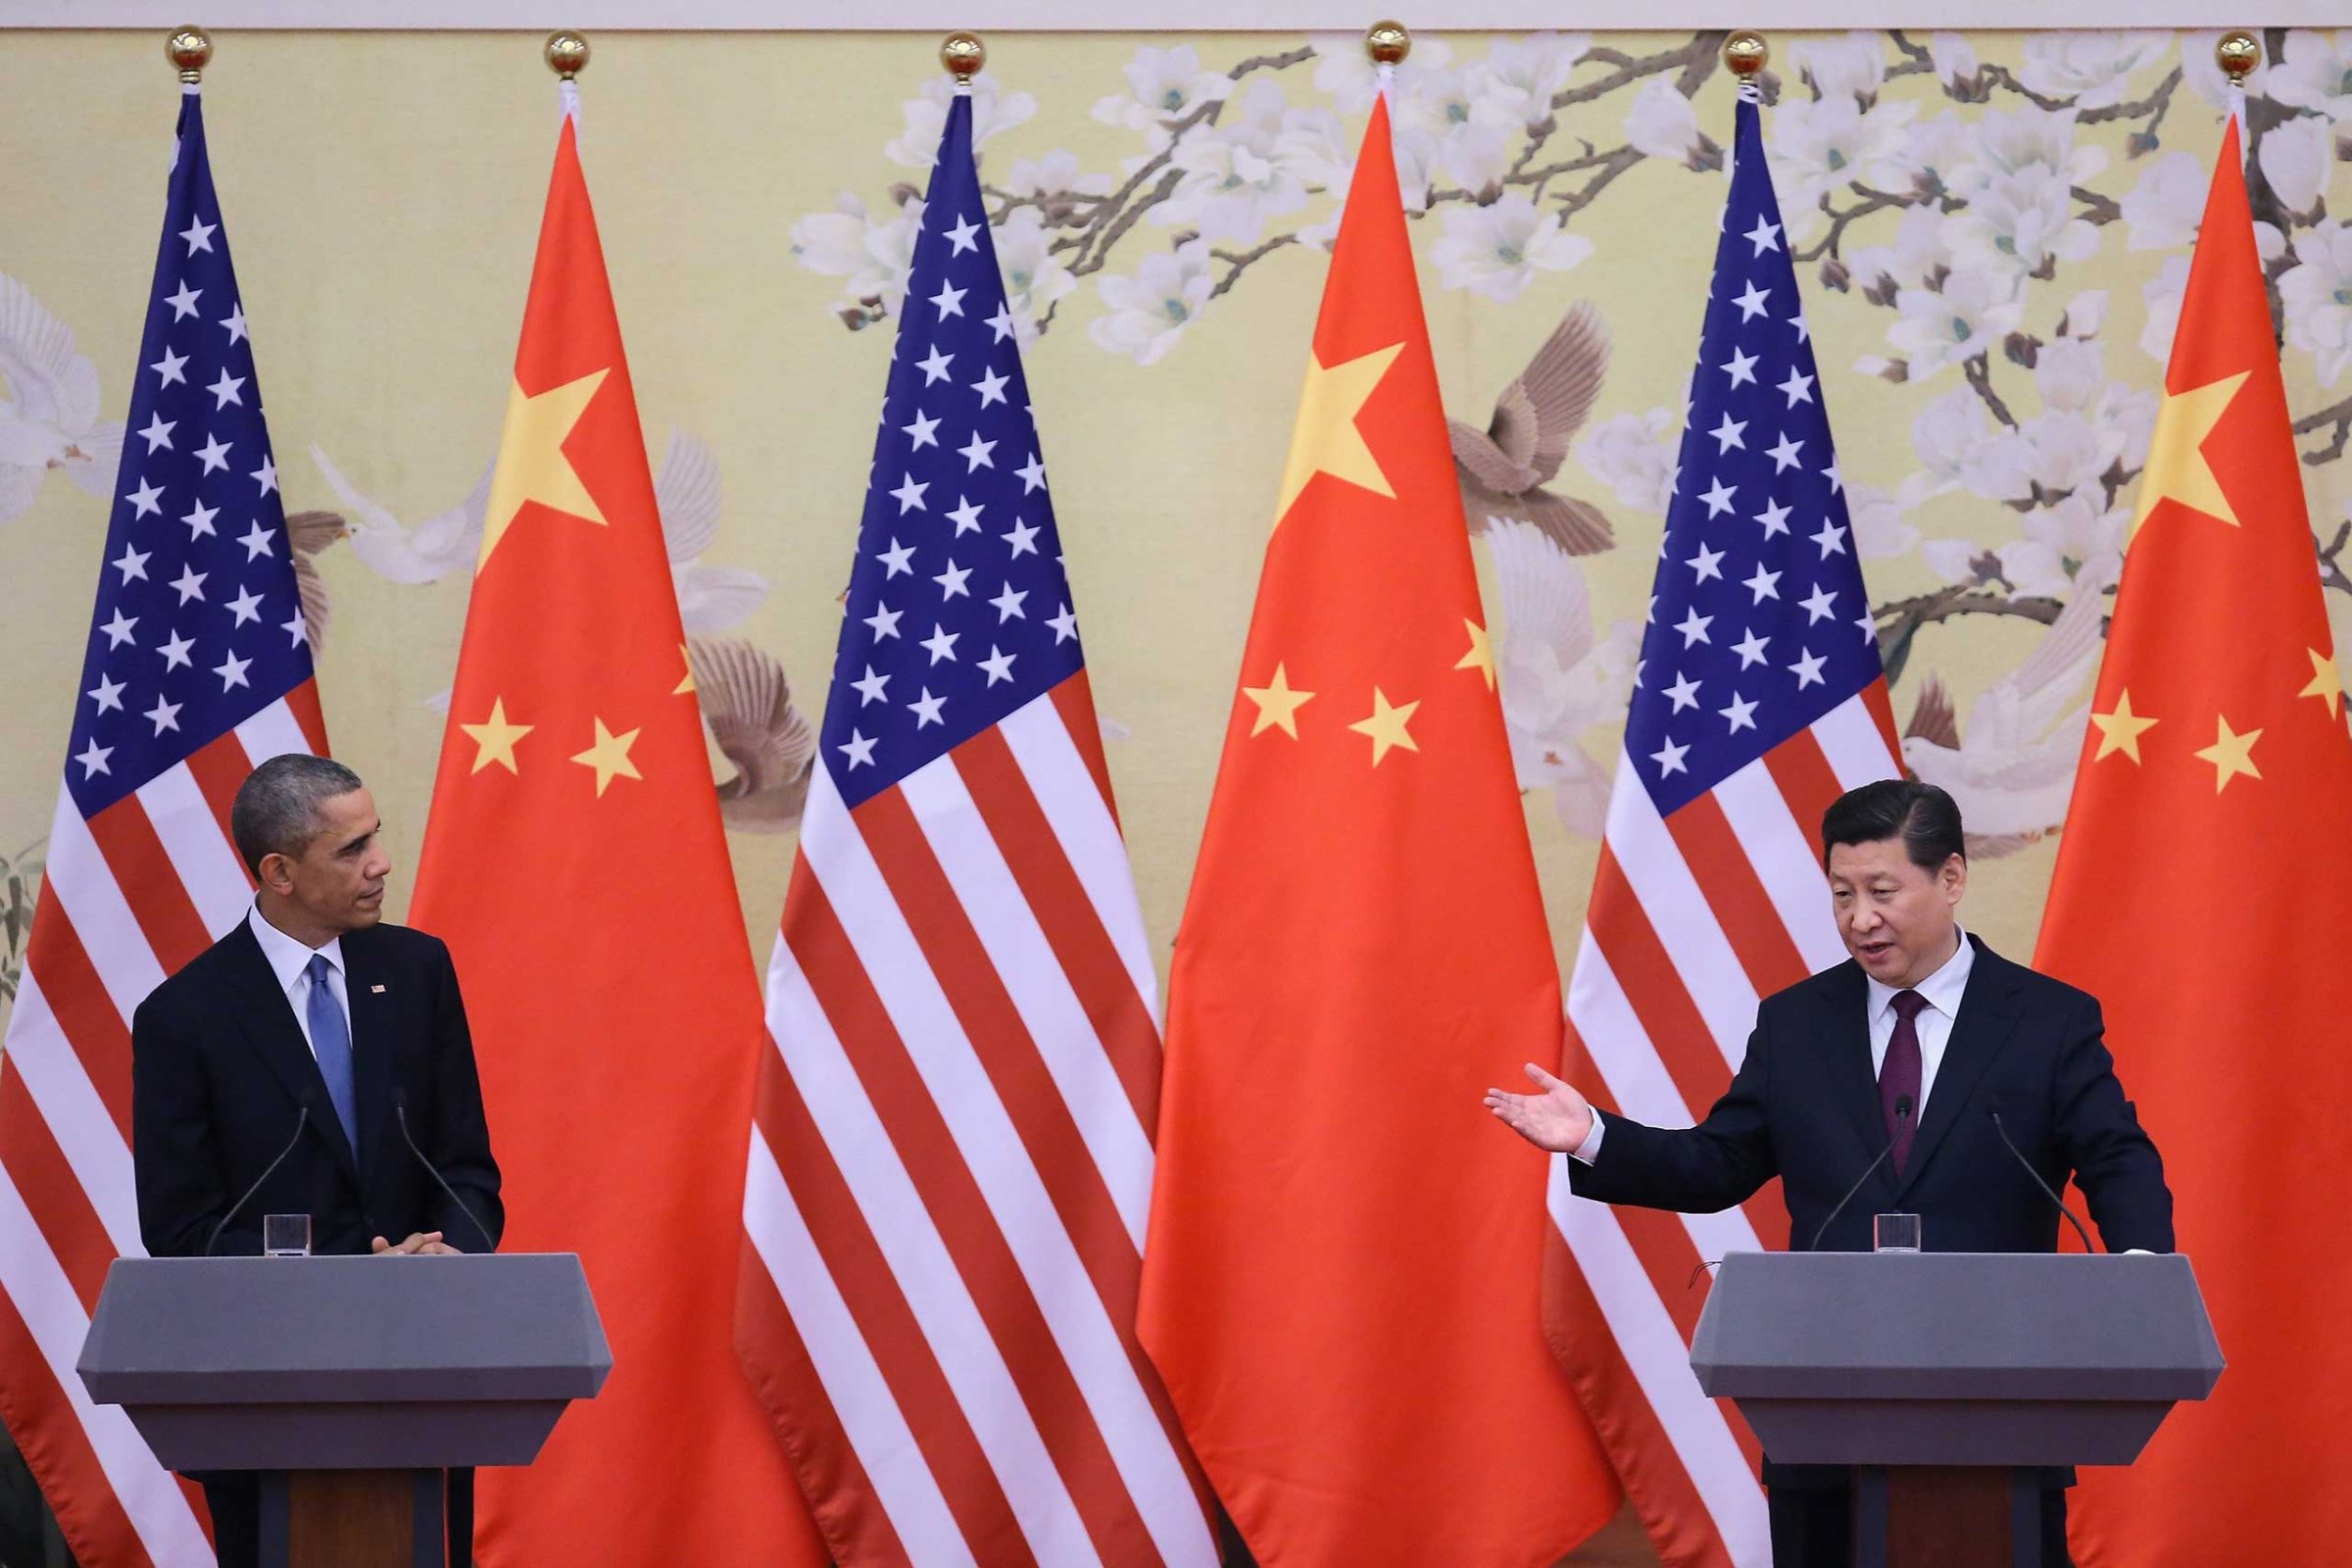 President Barack Obama and Chinese President Xi Jinping attend a press conference at the Great Hall of People on Nov. 12, 2014 in Beijing.